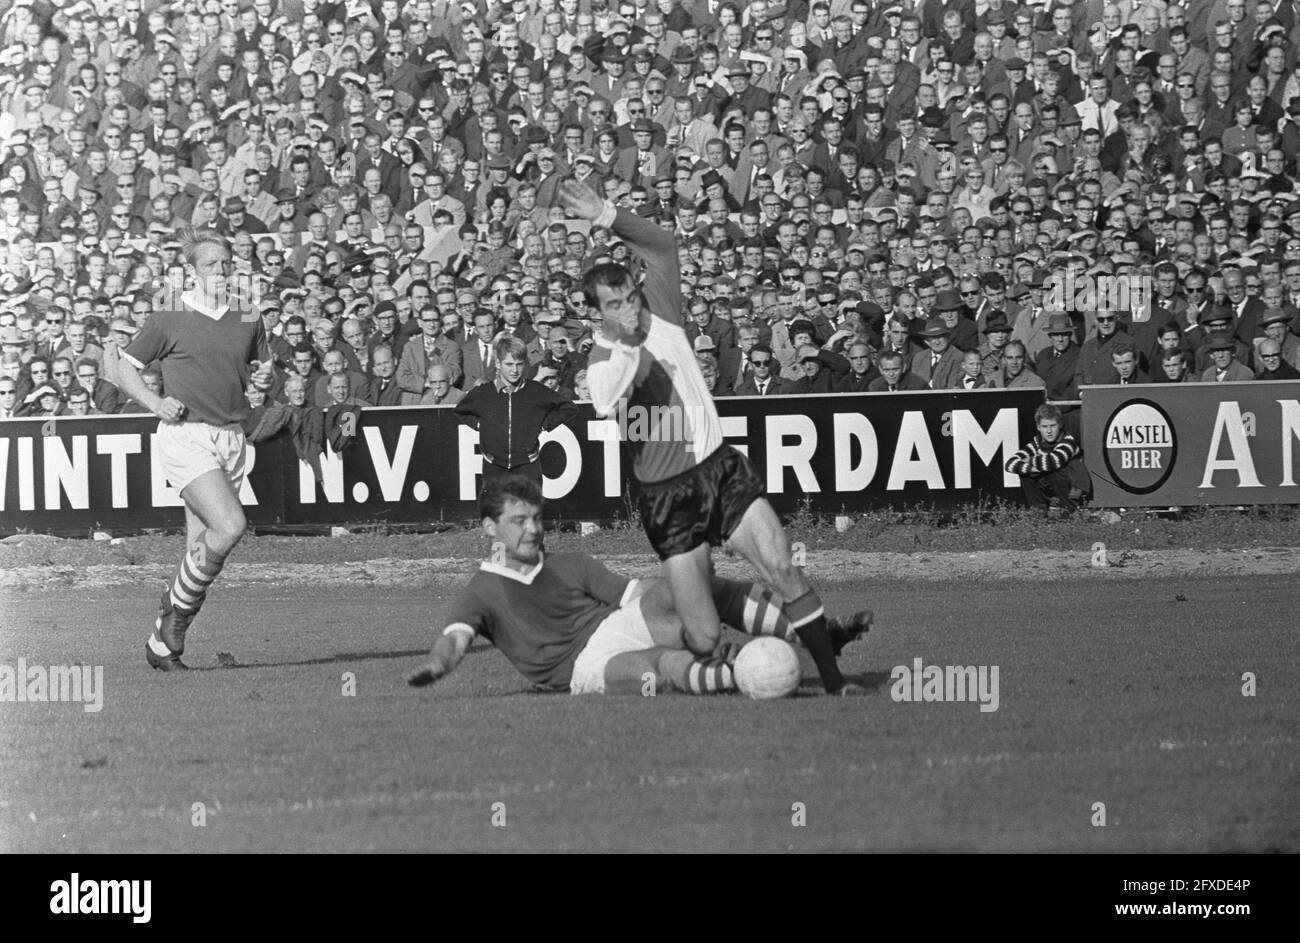 Sparta against Feyenoord 0-3, Coen Moulijn is tackled by Laseroms, October 18, 1964, sports, soccer, The Netherlands, 20th century press agency photo, news to remember, documentary, historic photography 1945-1990, visual stories, human history of the Twentieth Century, capturing moments in time Stock Photo